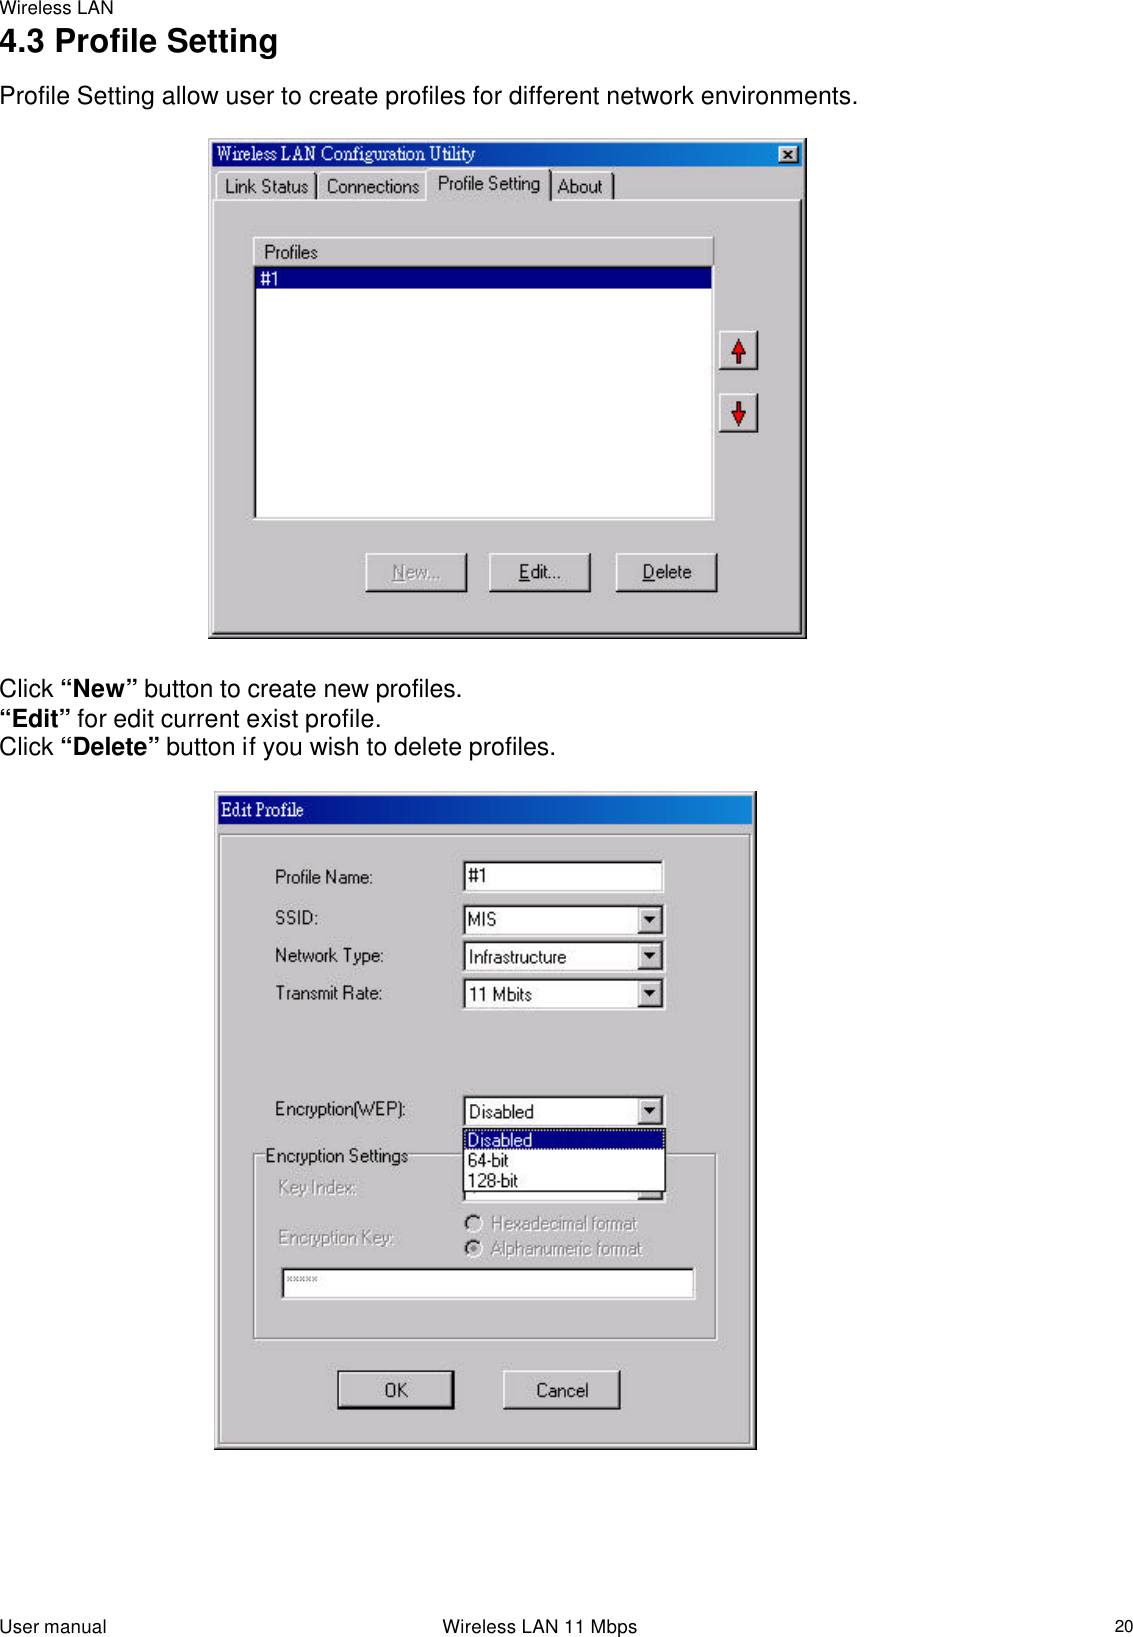 Wireless LAN  User manual                                                                 Wireless LAN 11 Mbps   204.3 Profile Setting  Profile Setting allow user to create profiles for different network environments.                                     Click “New” button to create new profiles.  “Edit” for edit current exist profile. Click “Delete” button if you wish to delete profiles.                                               